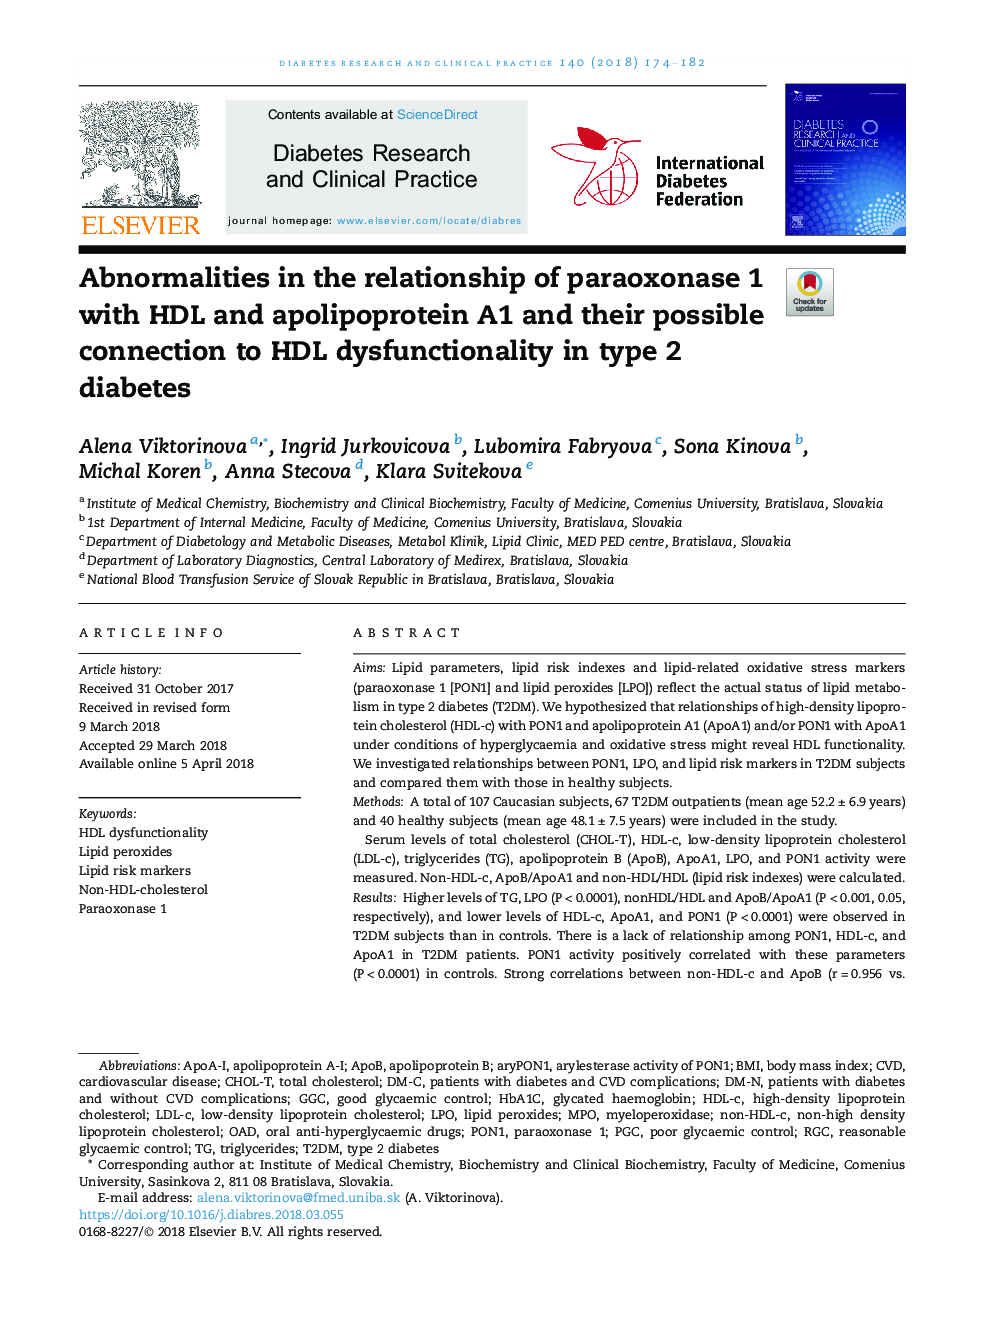 Abnormalities in the relationship of paraoxonase 1 with HDL and apolipoprotein A1 and their possible connection to HDL dysfunctionality in type 2 diabetes